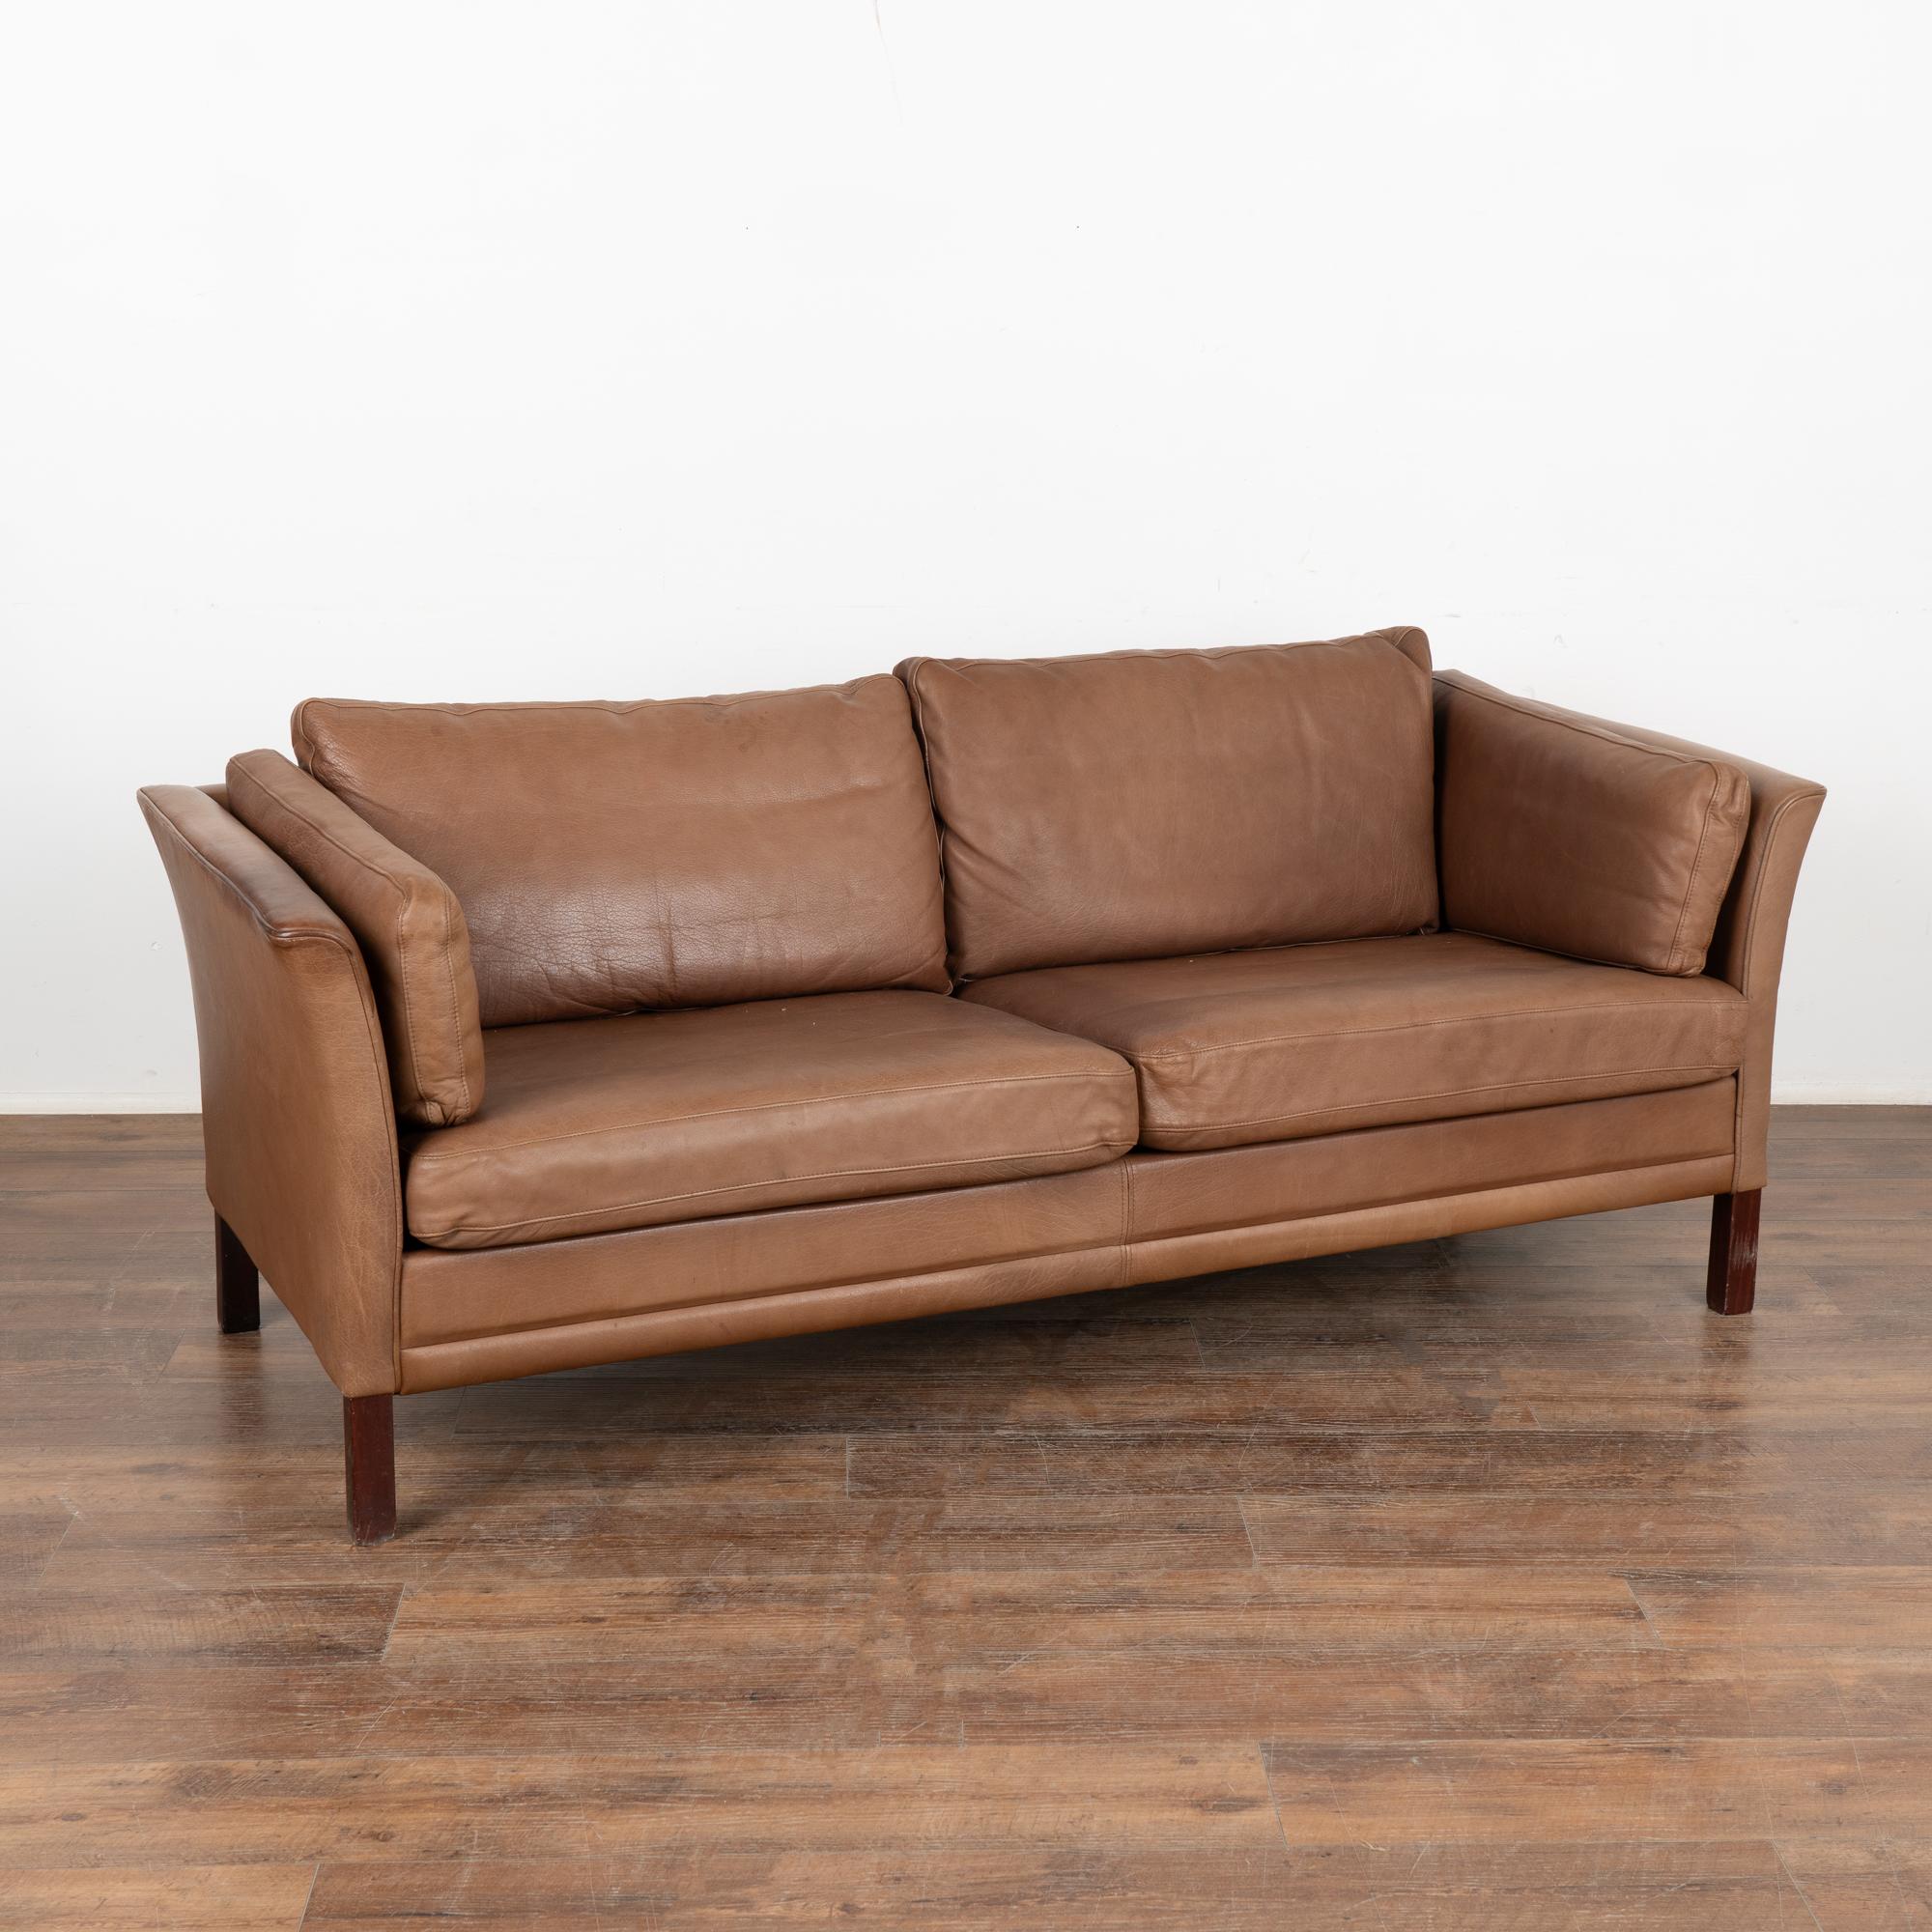 Mid-century modern two seat leather sofa loveseat by Mogens Hansen. This is a comfortable sofa combining tradition and modern style.
Upholstered in vintage brown leather, loose cushions with down filling, hardwood legs in dark stained beech wood.